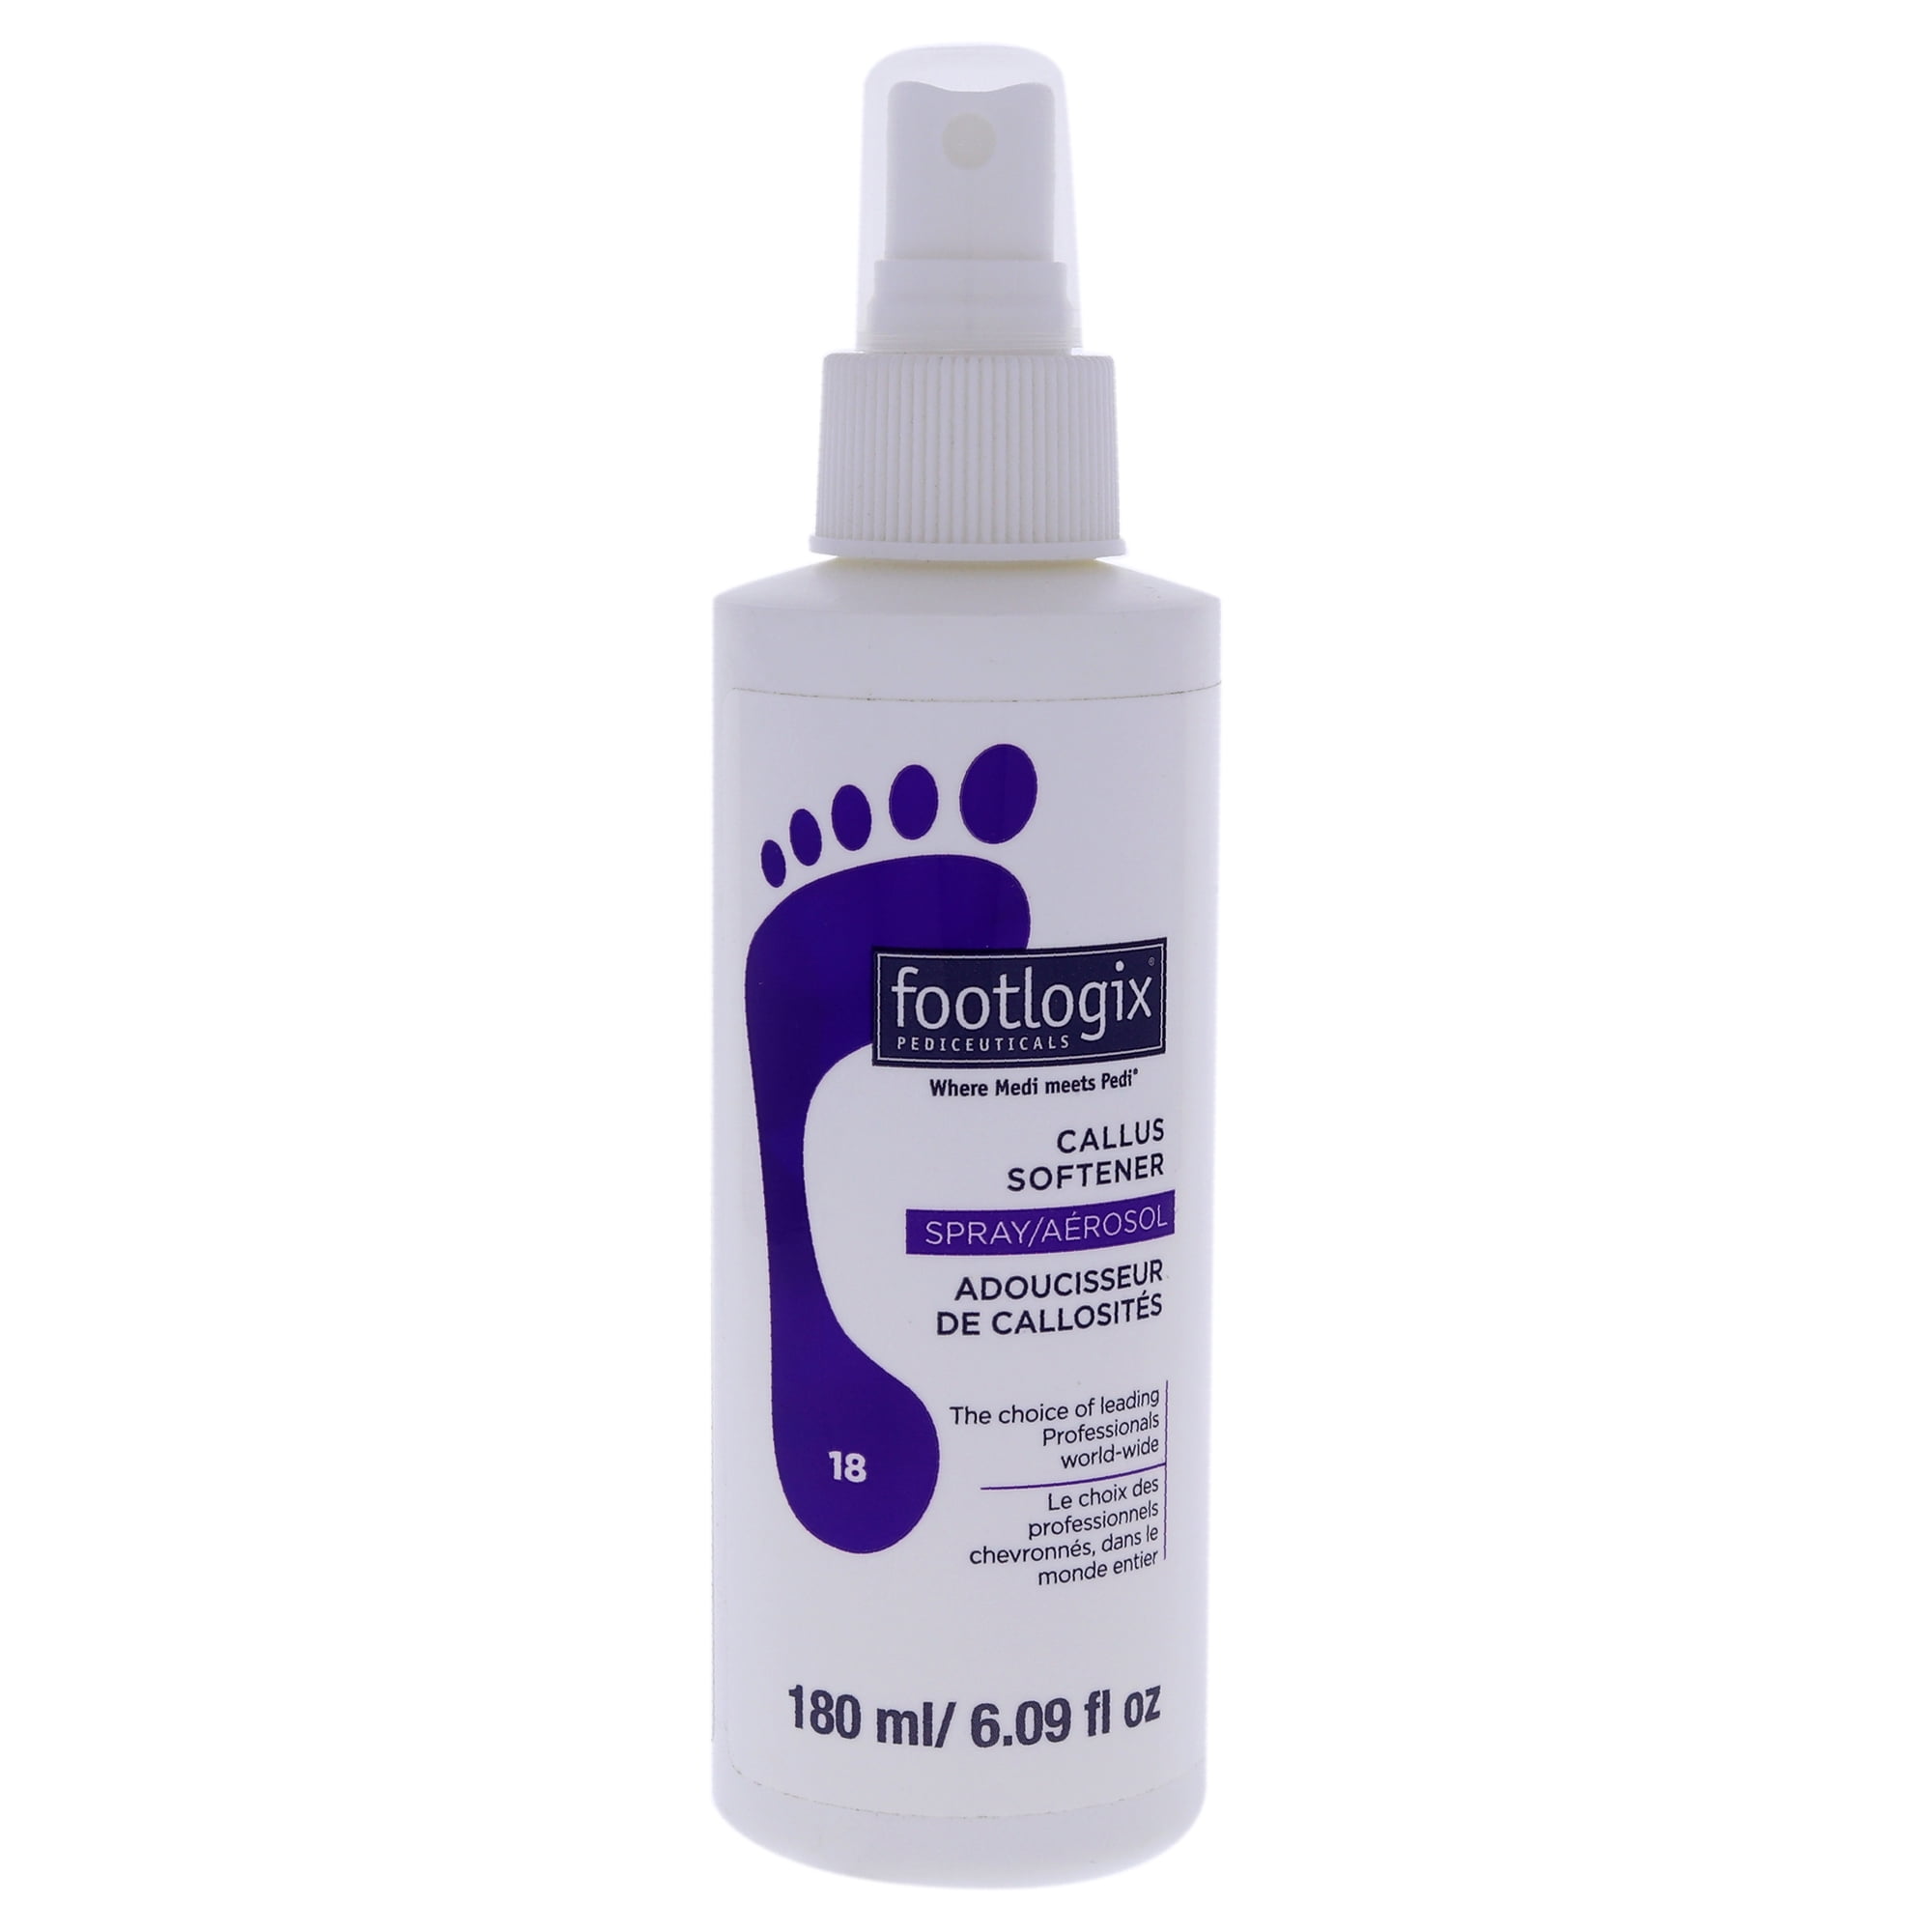 Foot Callus Removal Spray 1.01 Oz Dry Feet Skin Remover Foot Care Callus  Softener For Exfoliation Hydrating Quickly Nourish Feet - AliExpress